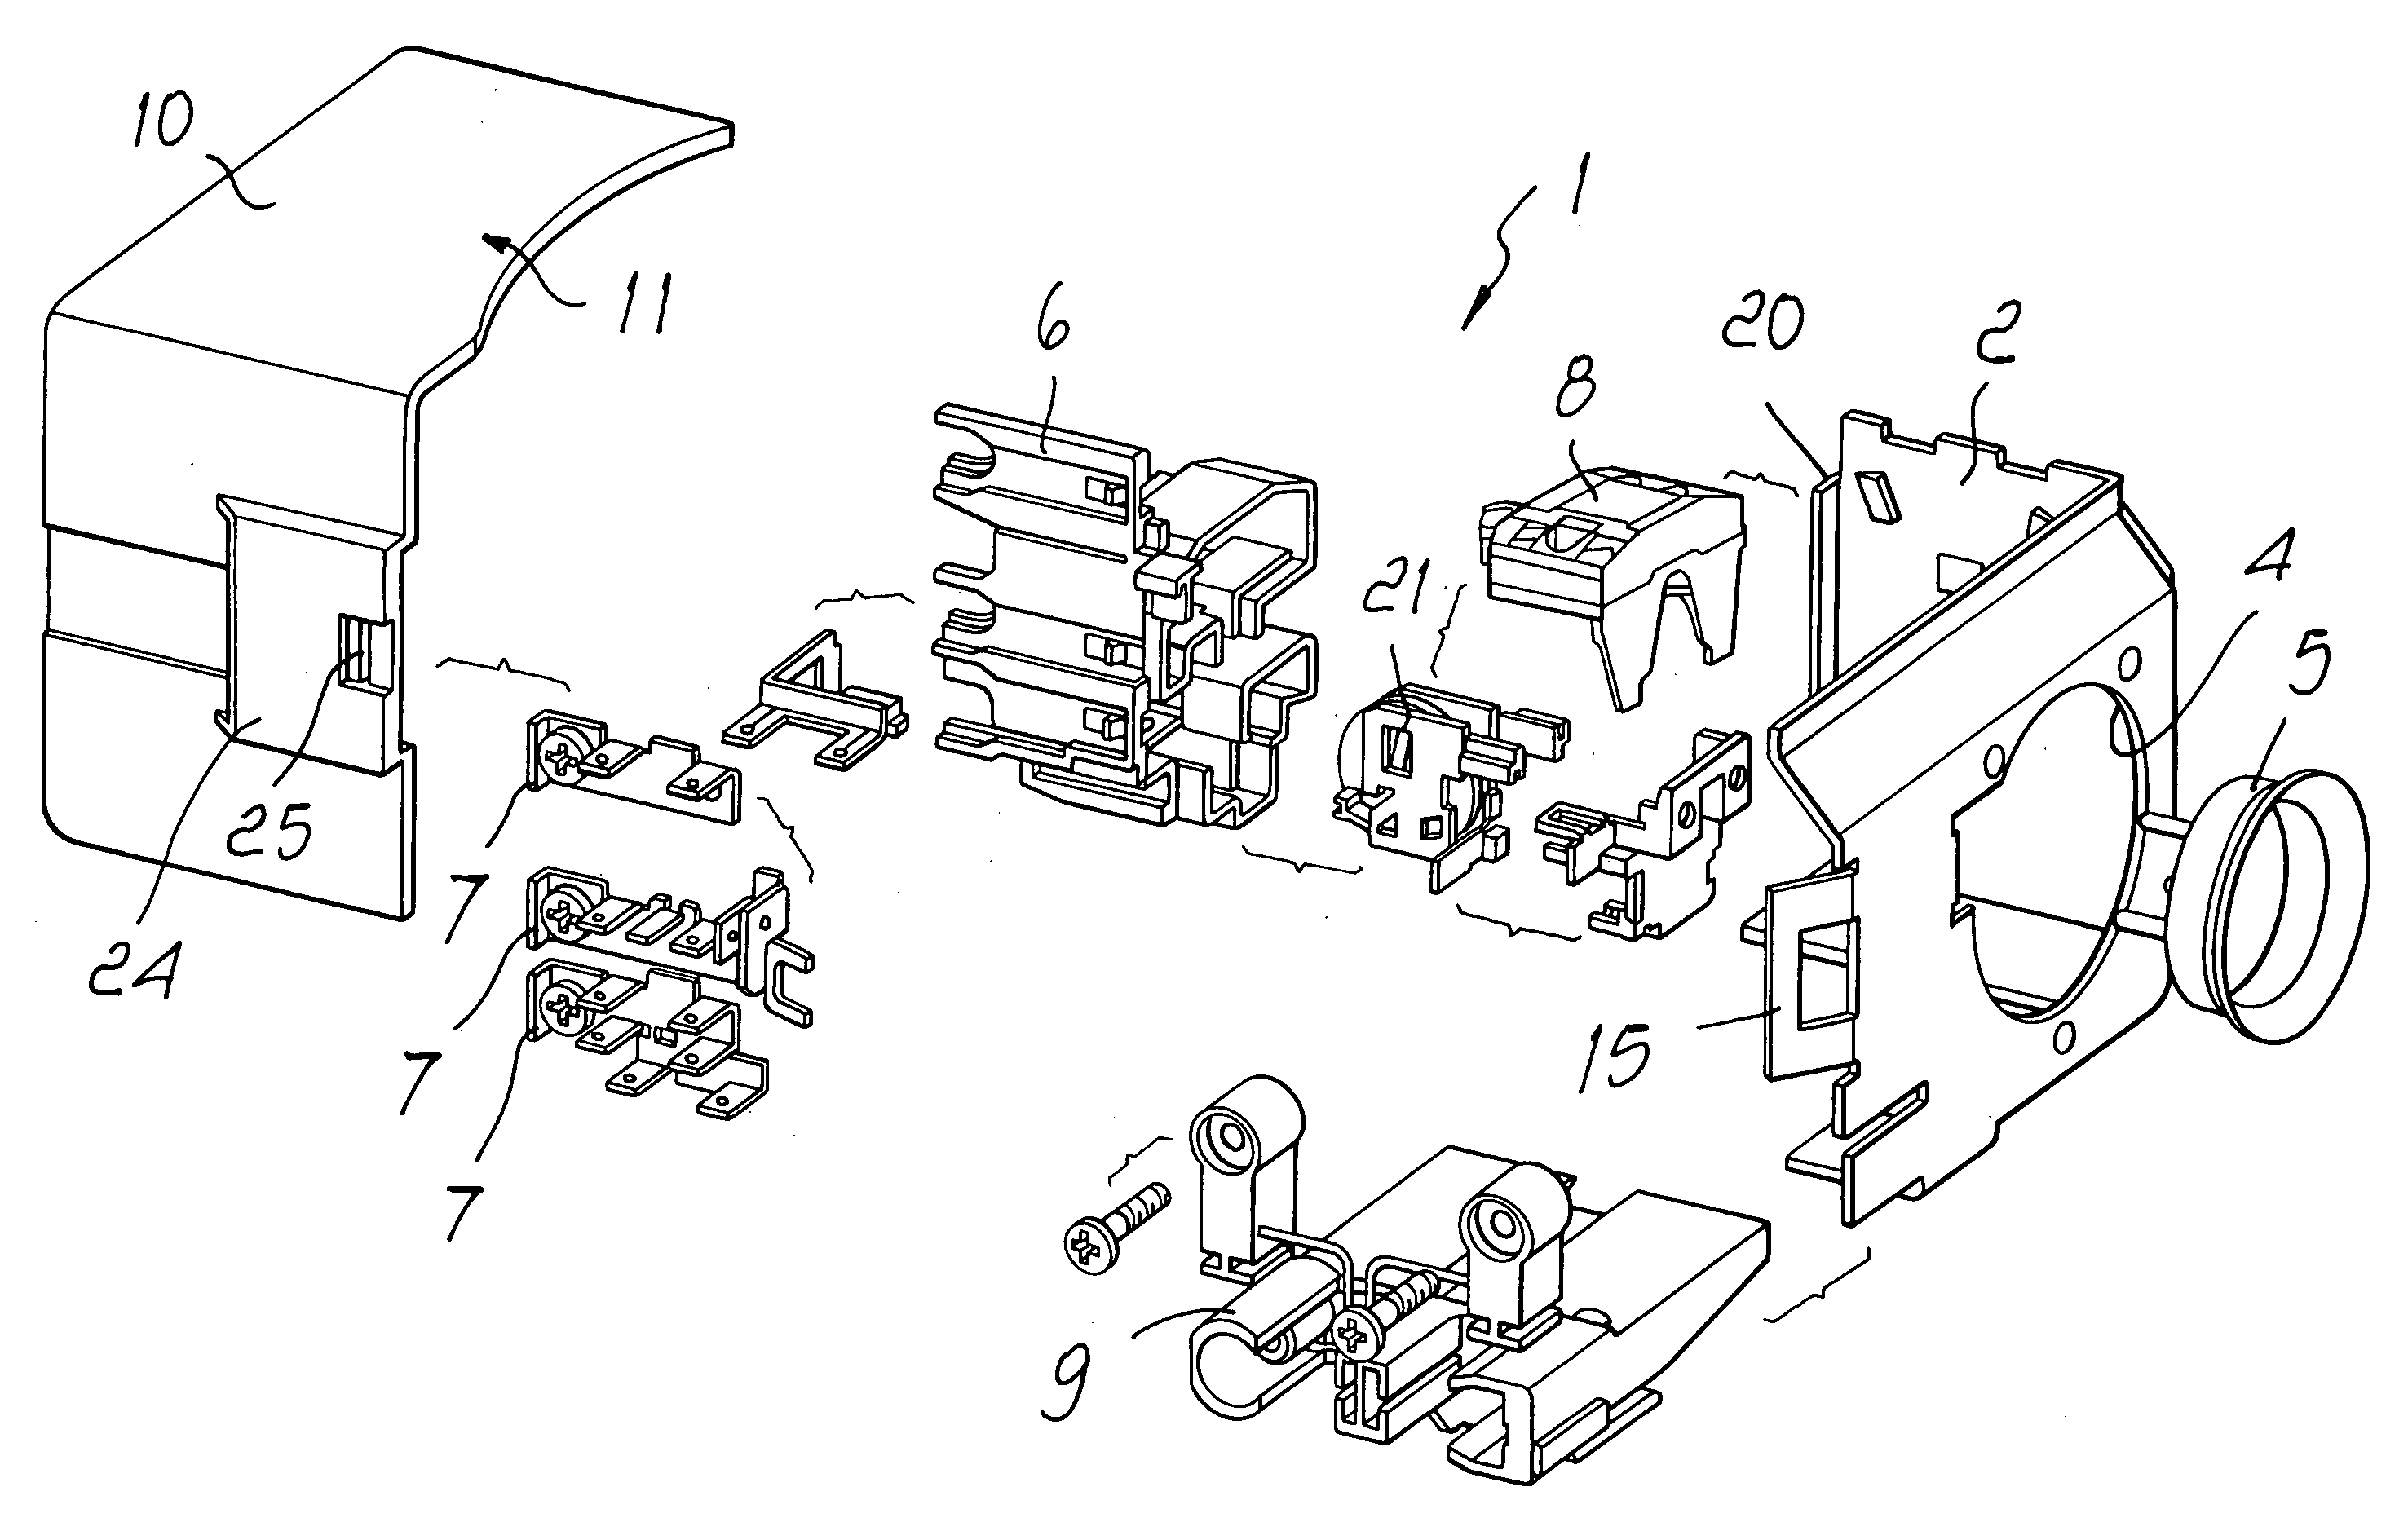 Terminal block assembly for the connection and control of sealed compressors particularly for home refrigerators